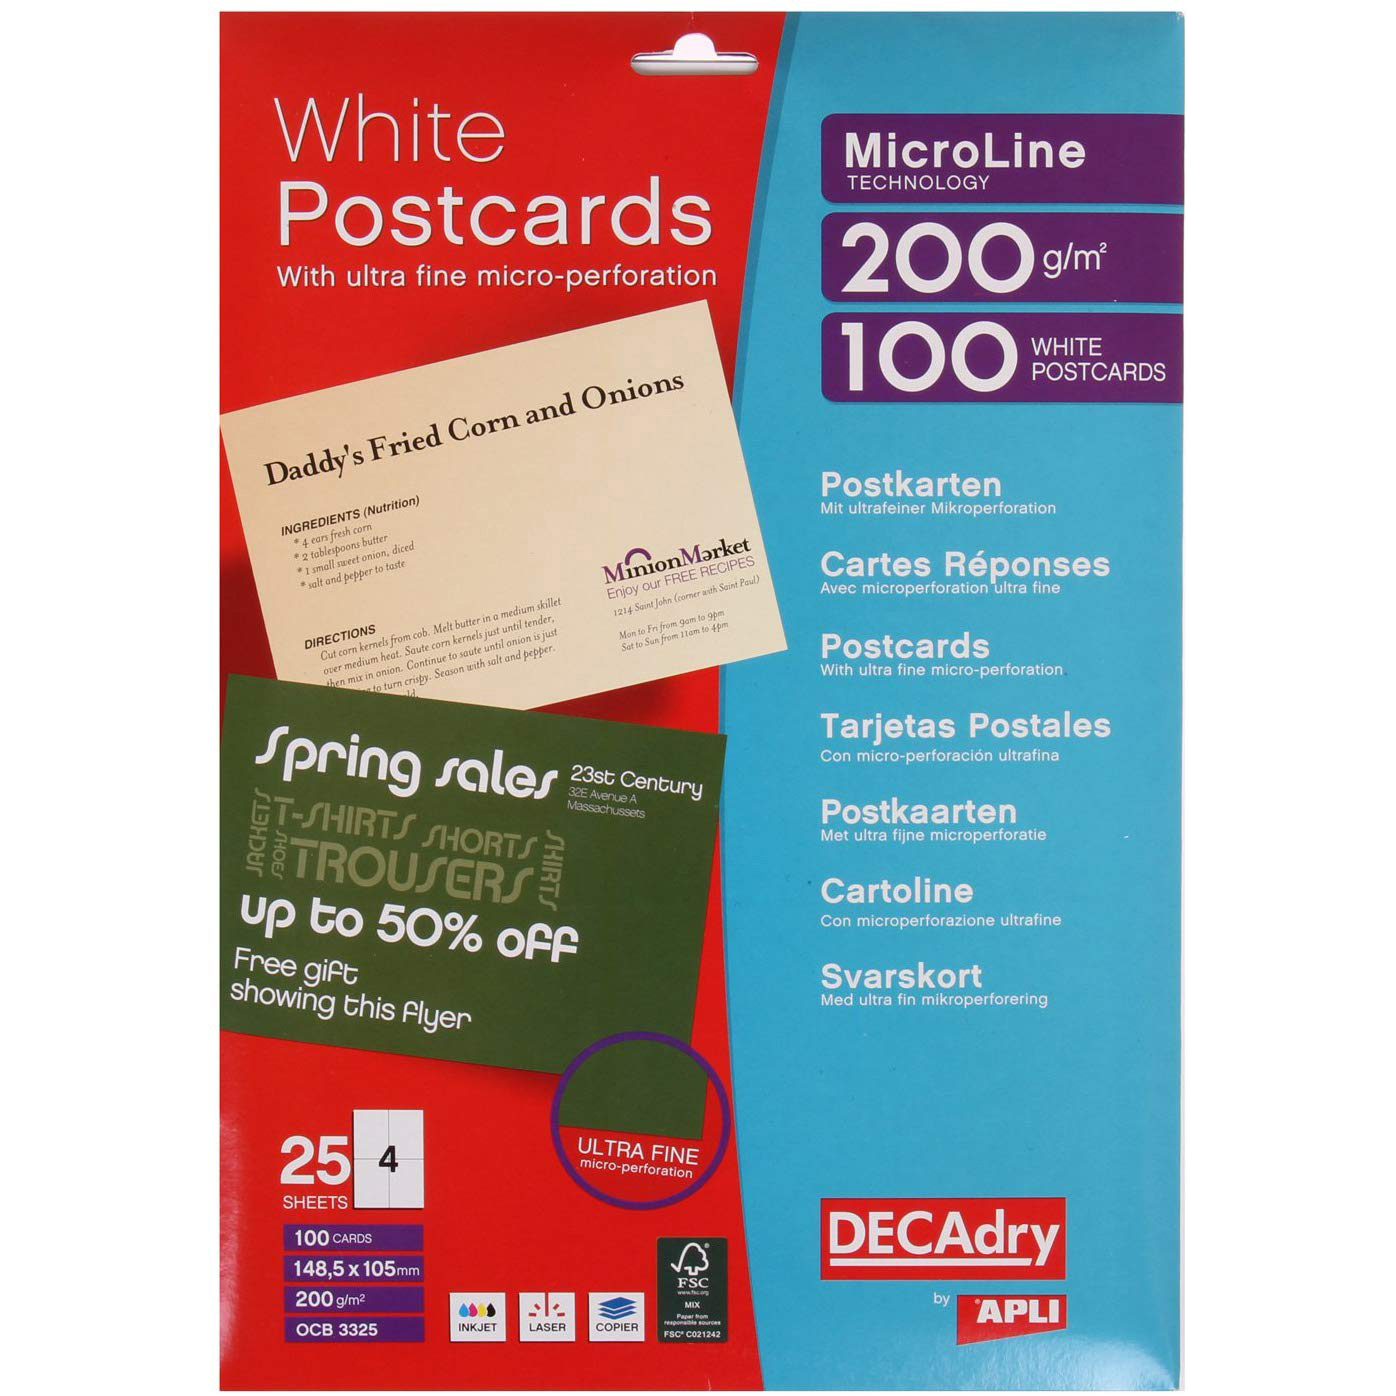 Original Decadry 200gsm A4 148.5x105mm Micro-perforated Wheet Postcard Sheets - 100 Cards (OCB3325)